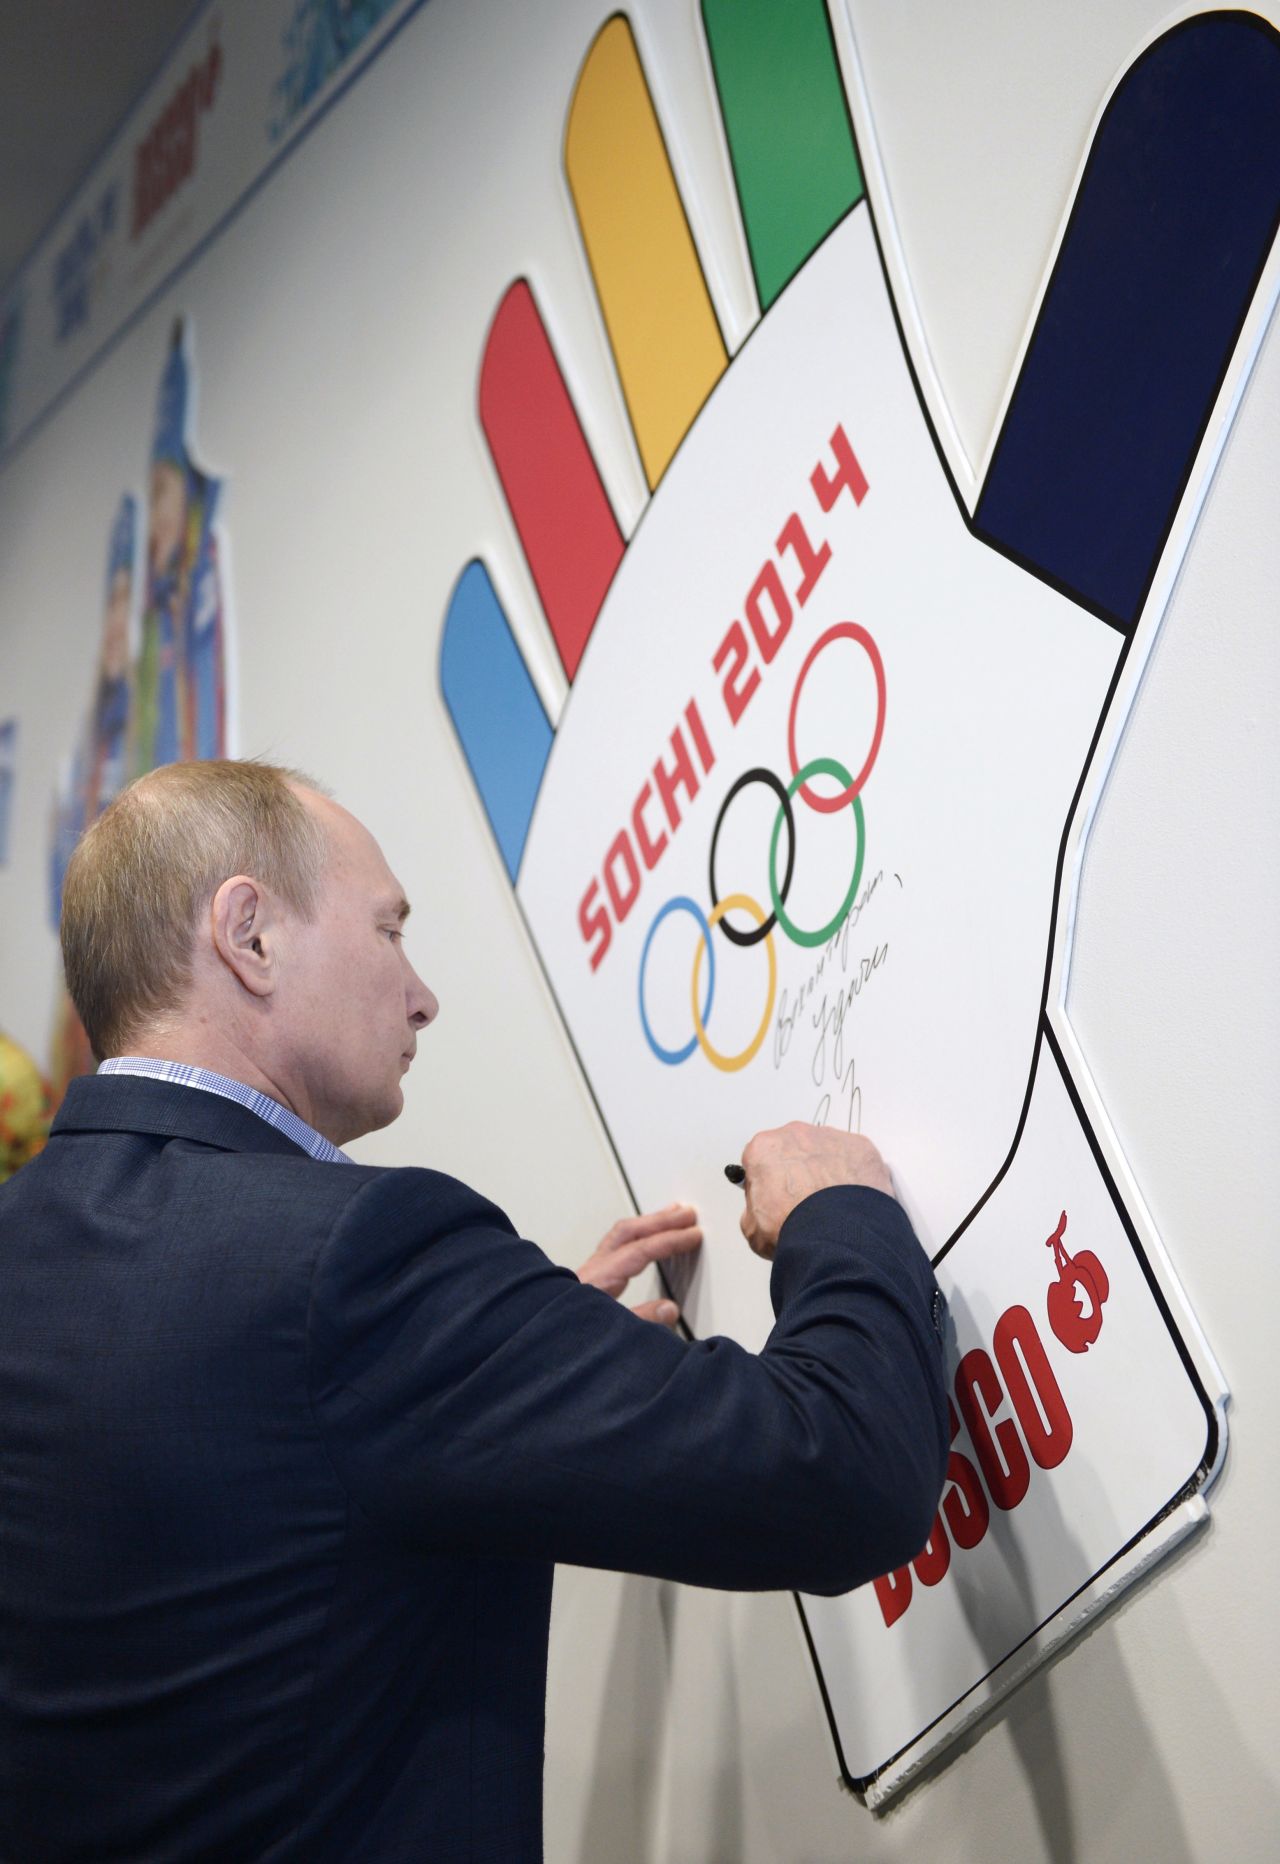 Given the enormous investment, Russian President Vladimir Putin's personal political prestige is at stake in staging a successful Olympics.